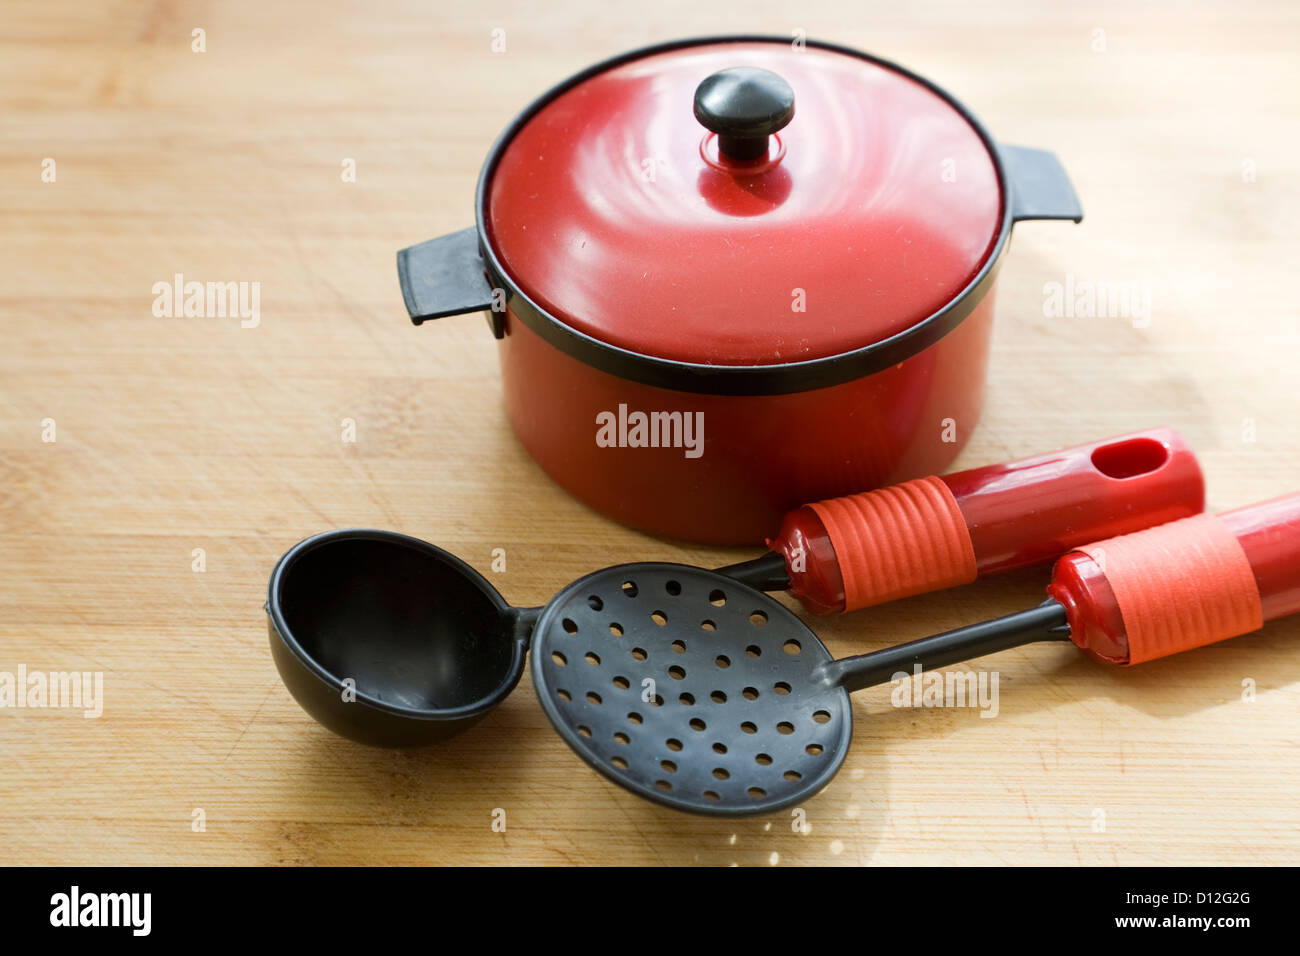 Cooking utensil on the chopping board Stock Photo